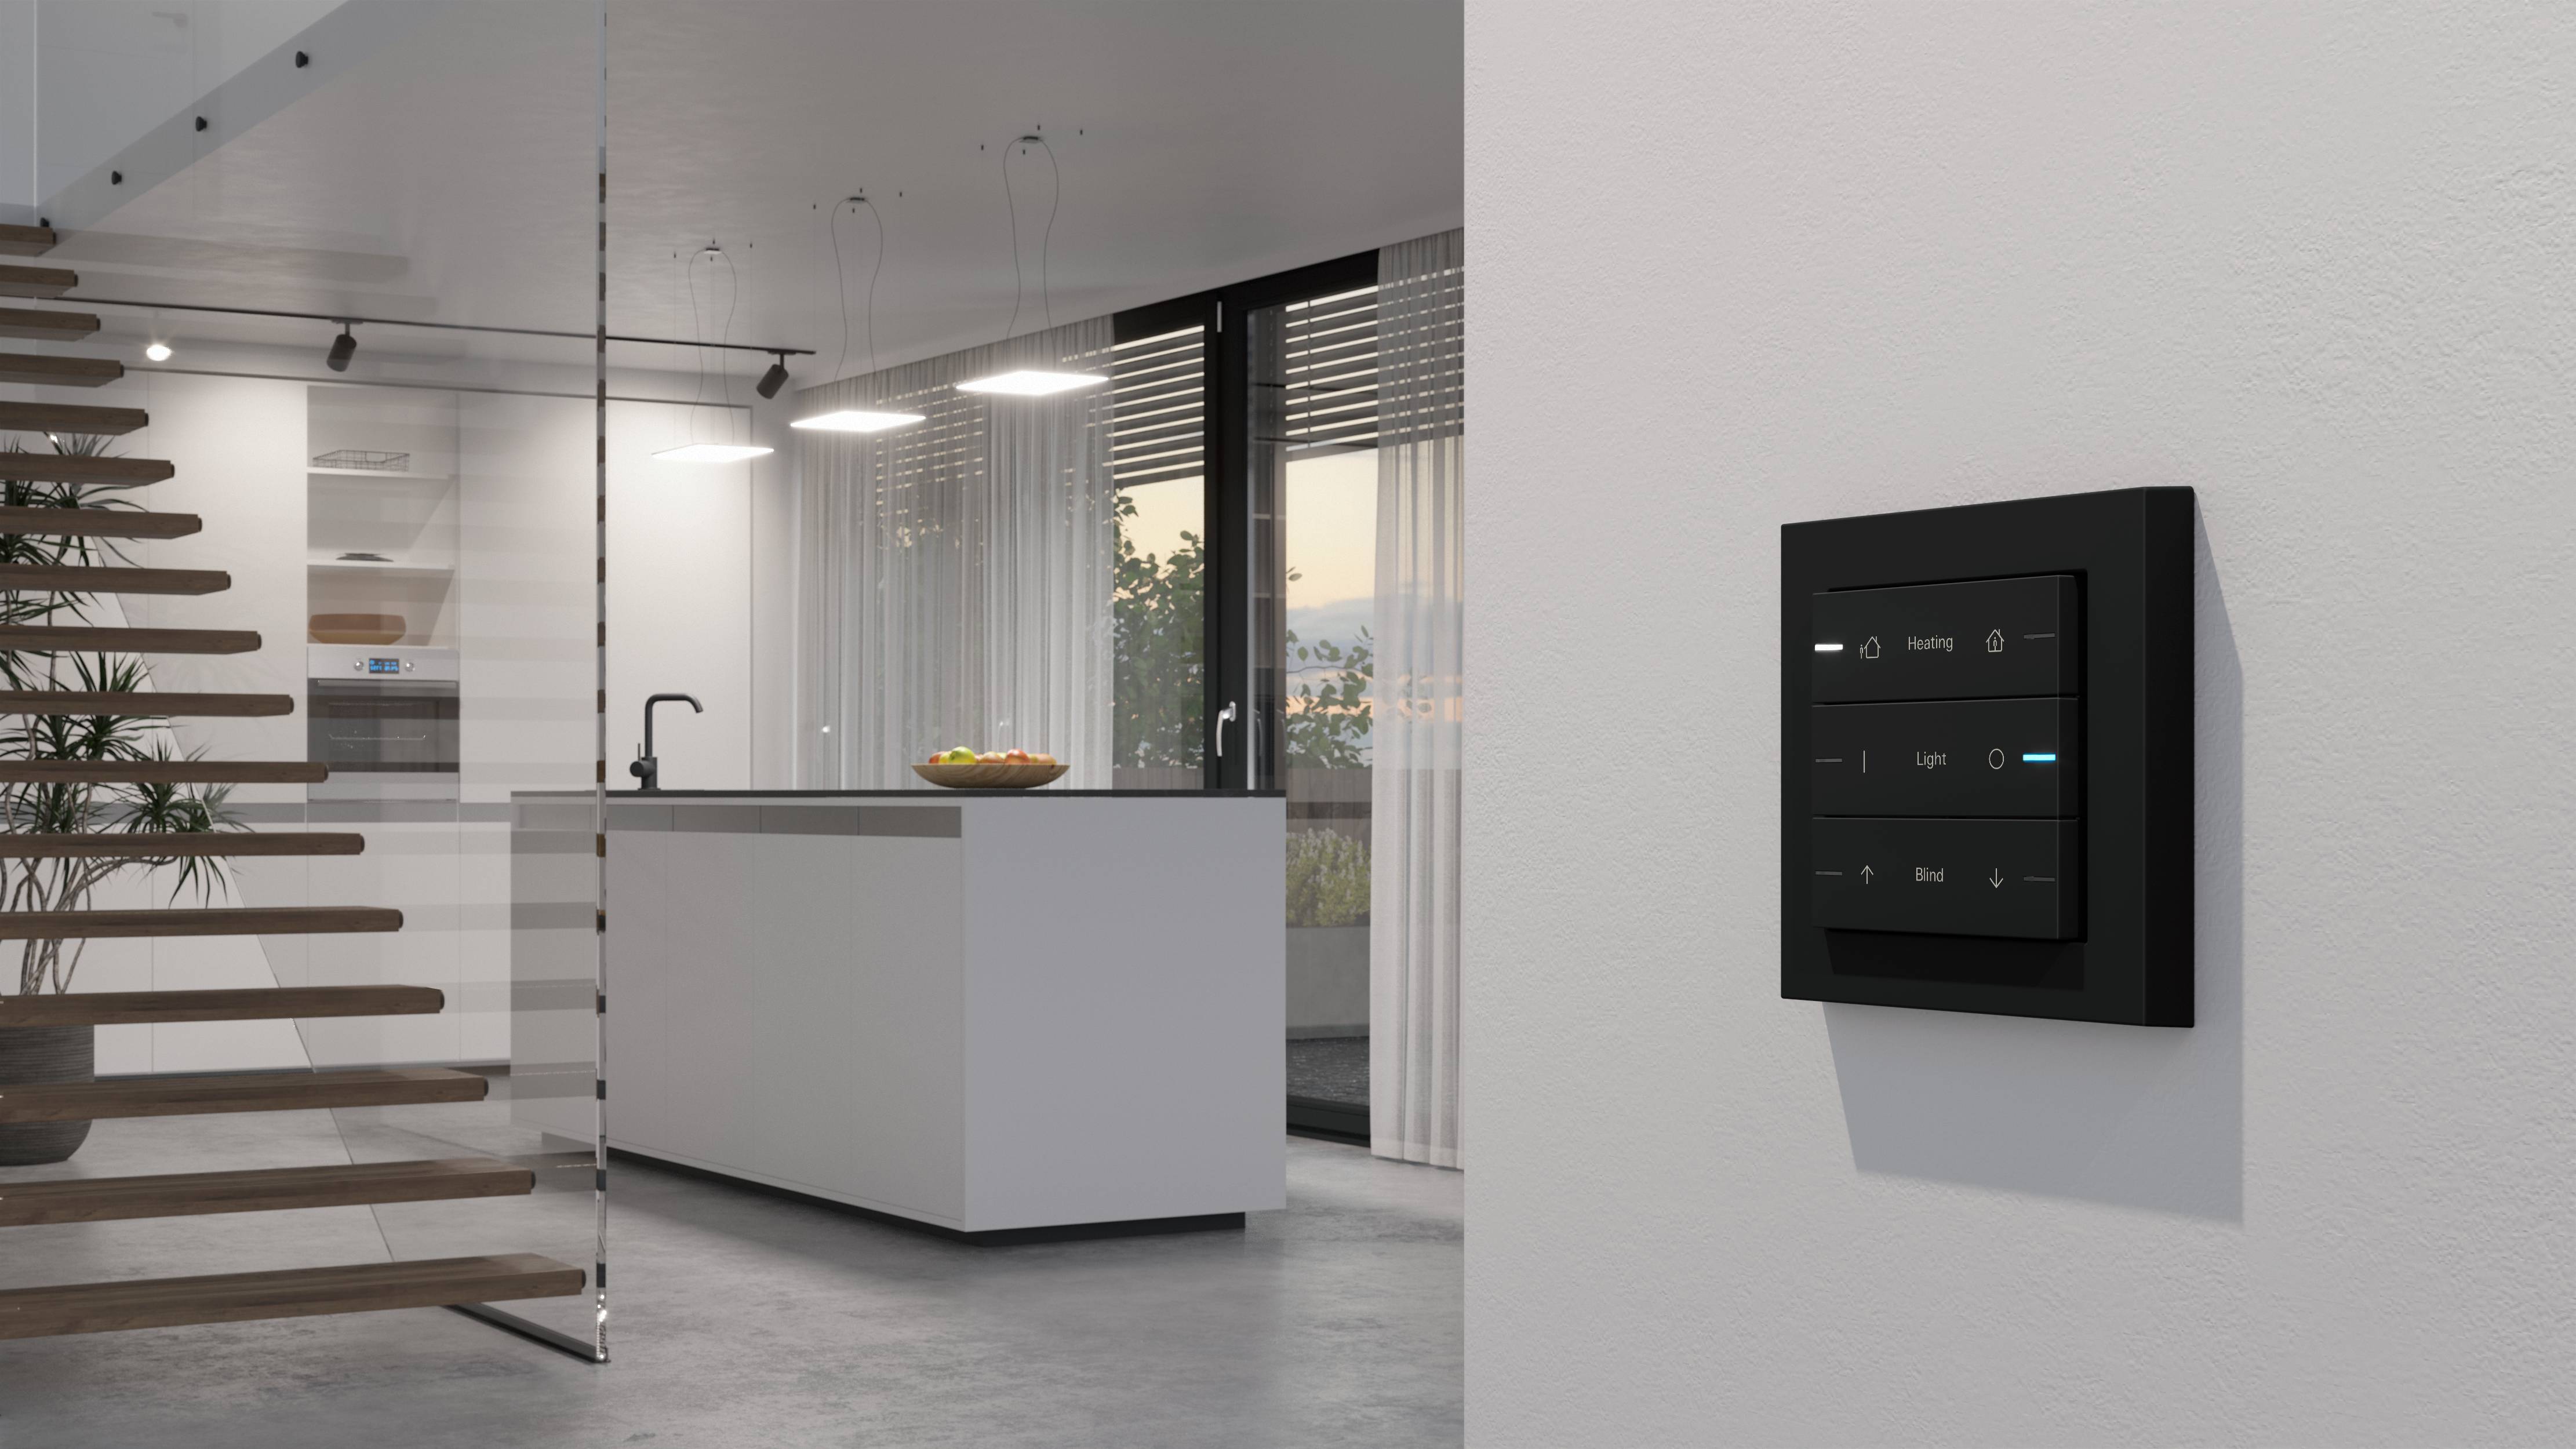 As a component of Gira System 55, the Gira pushbutton sensor 4 combines smart KNX convenience with a broad range of different designs. Find out more. ➤